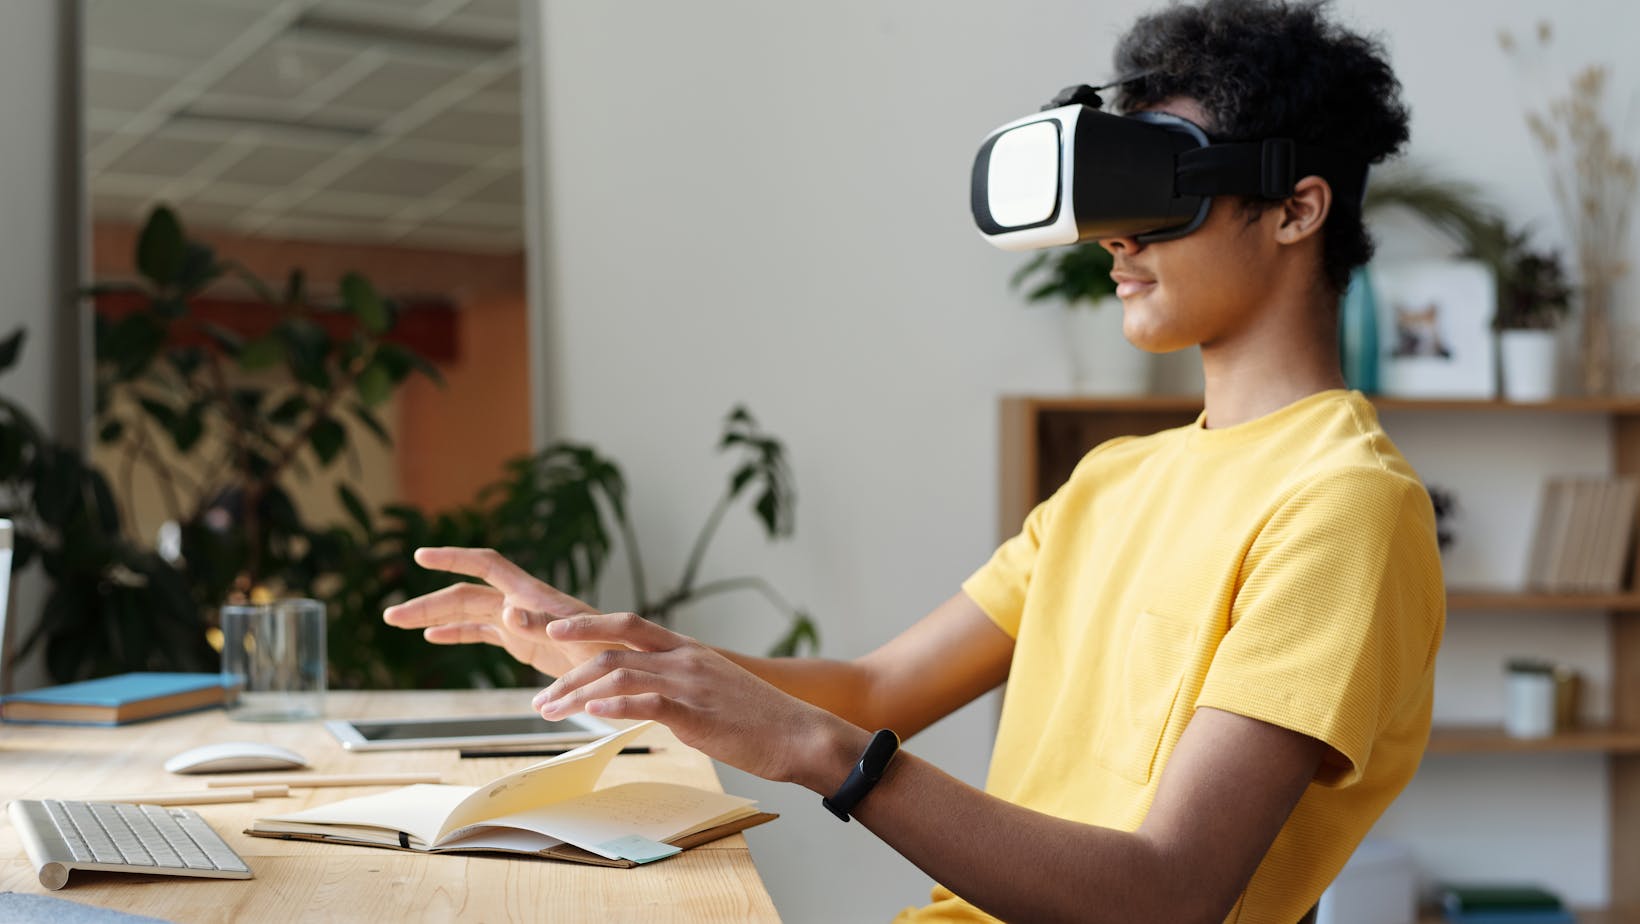 what is the advantage of mixed reality over ar or vr experiences?